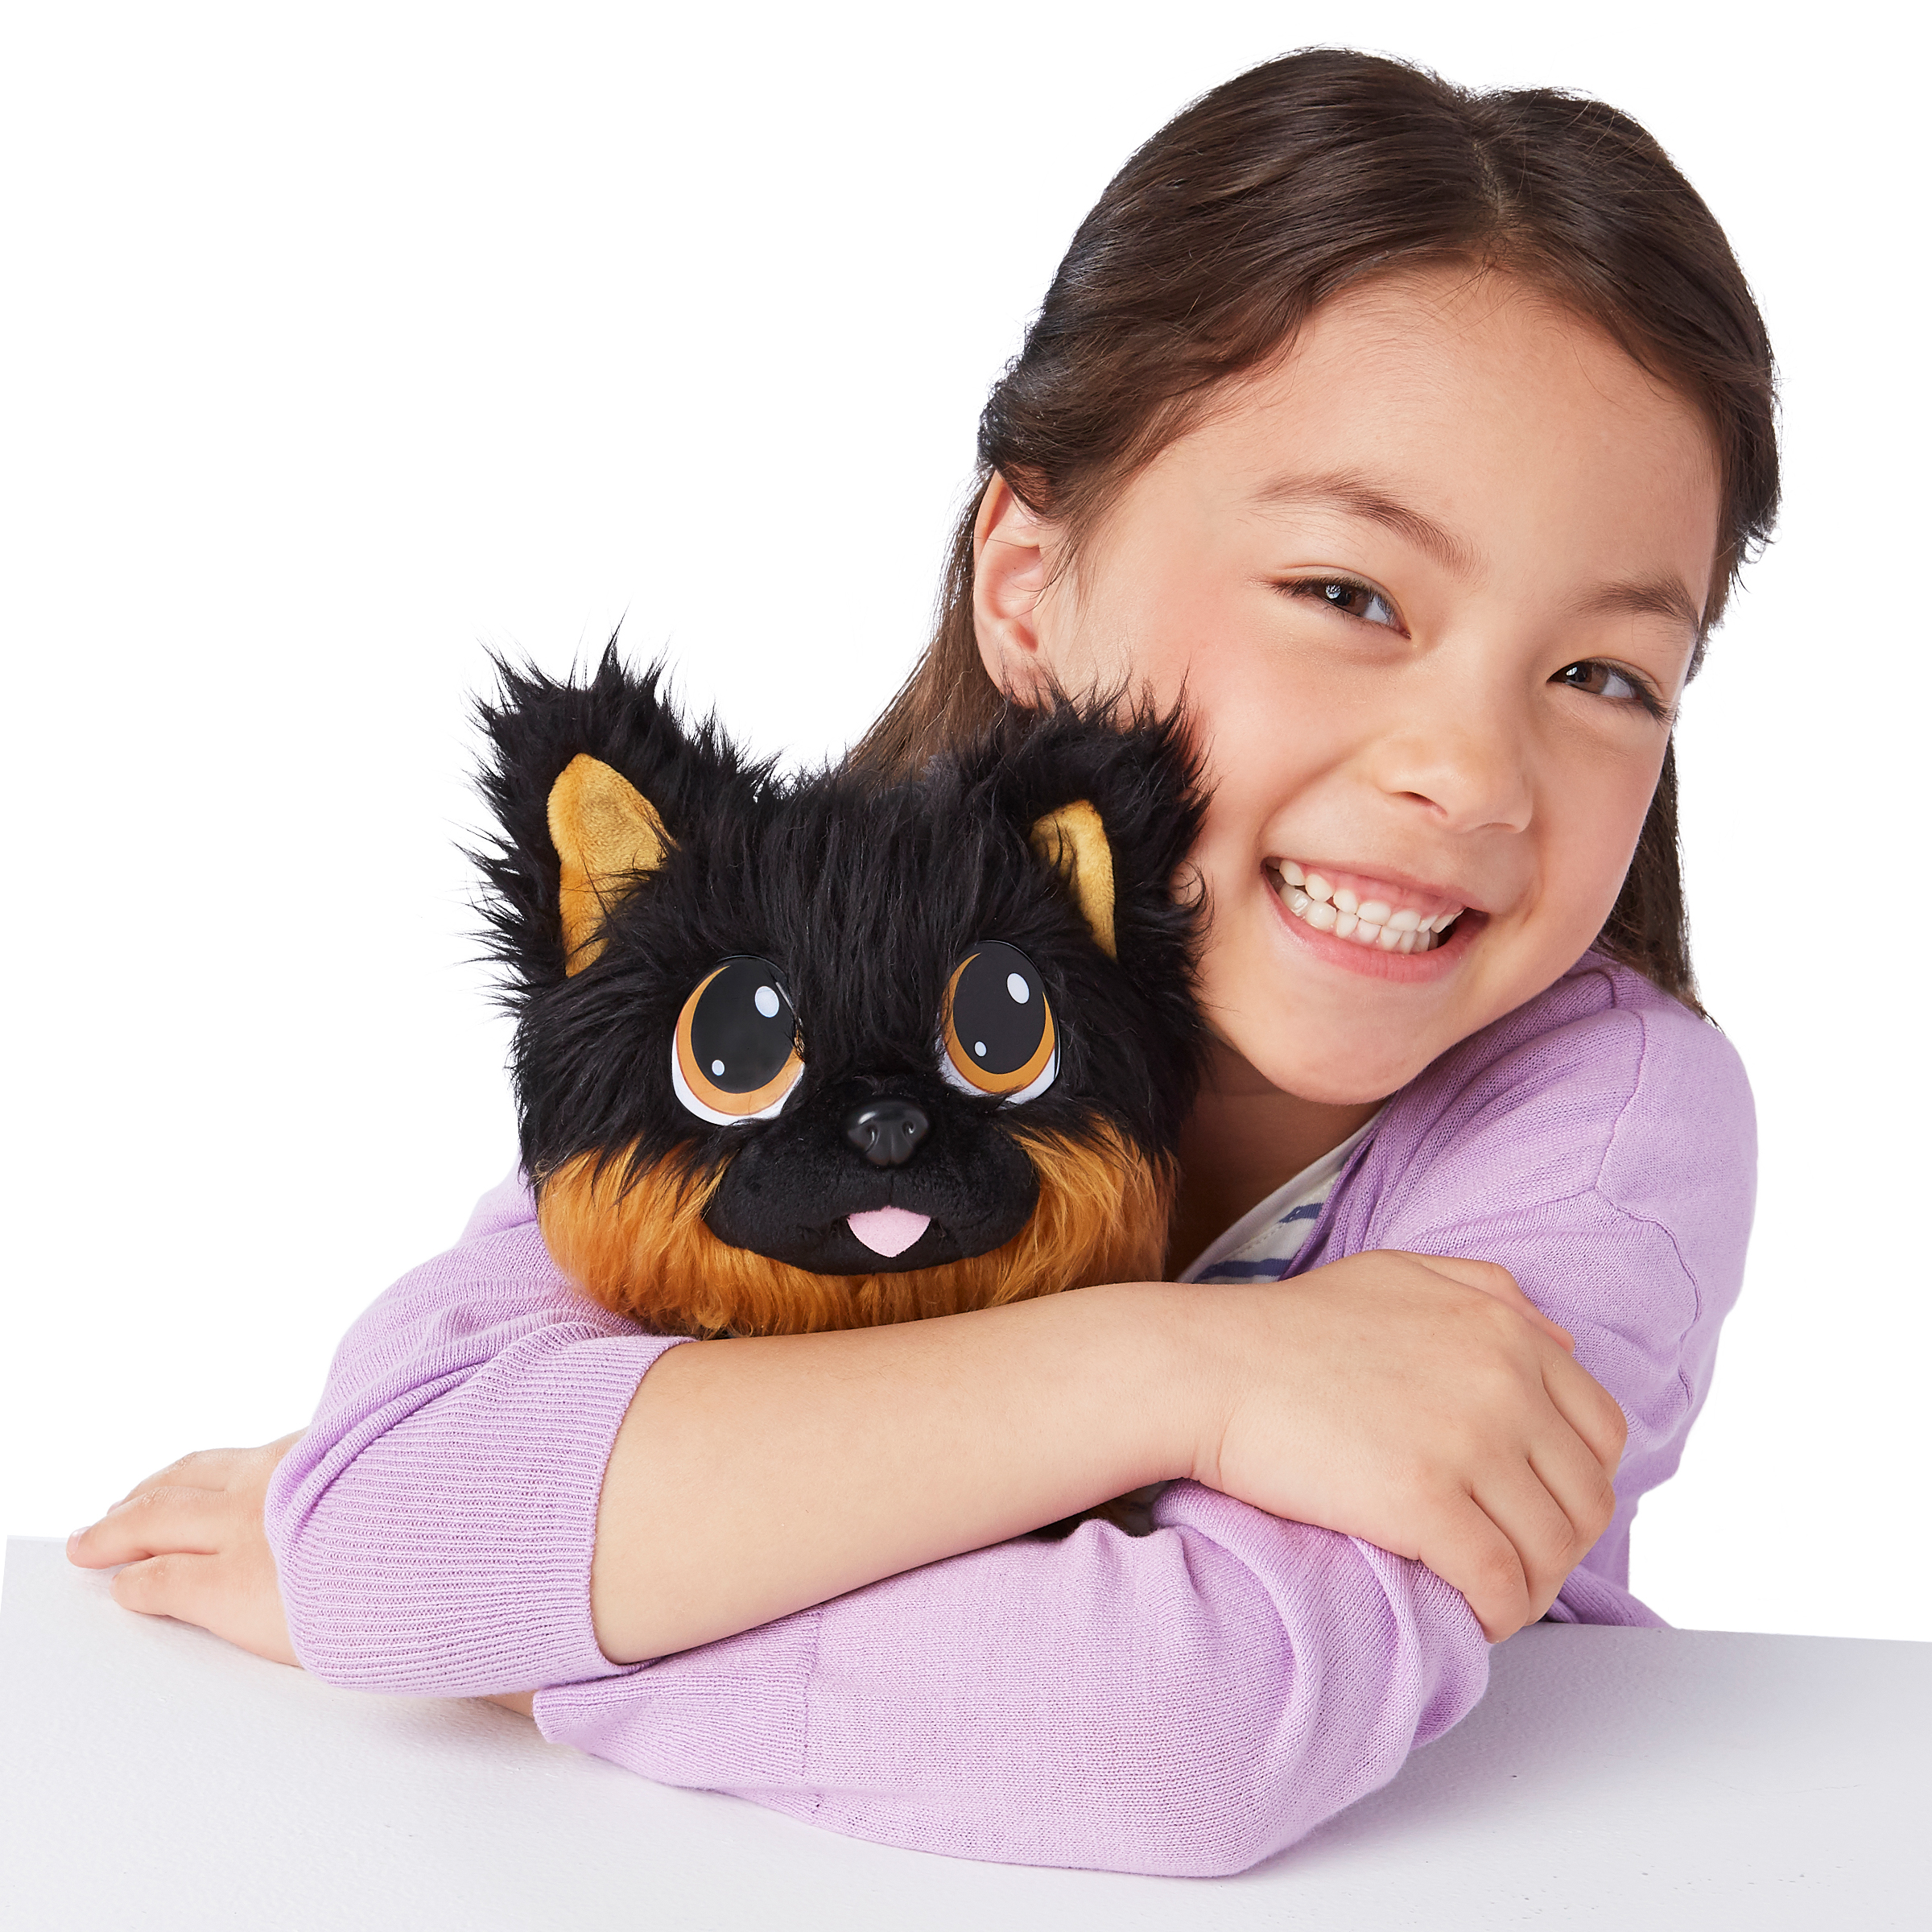 Rescue runts shepherd rescue dog plush by kd kids - image 3 of 8